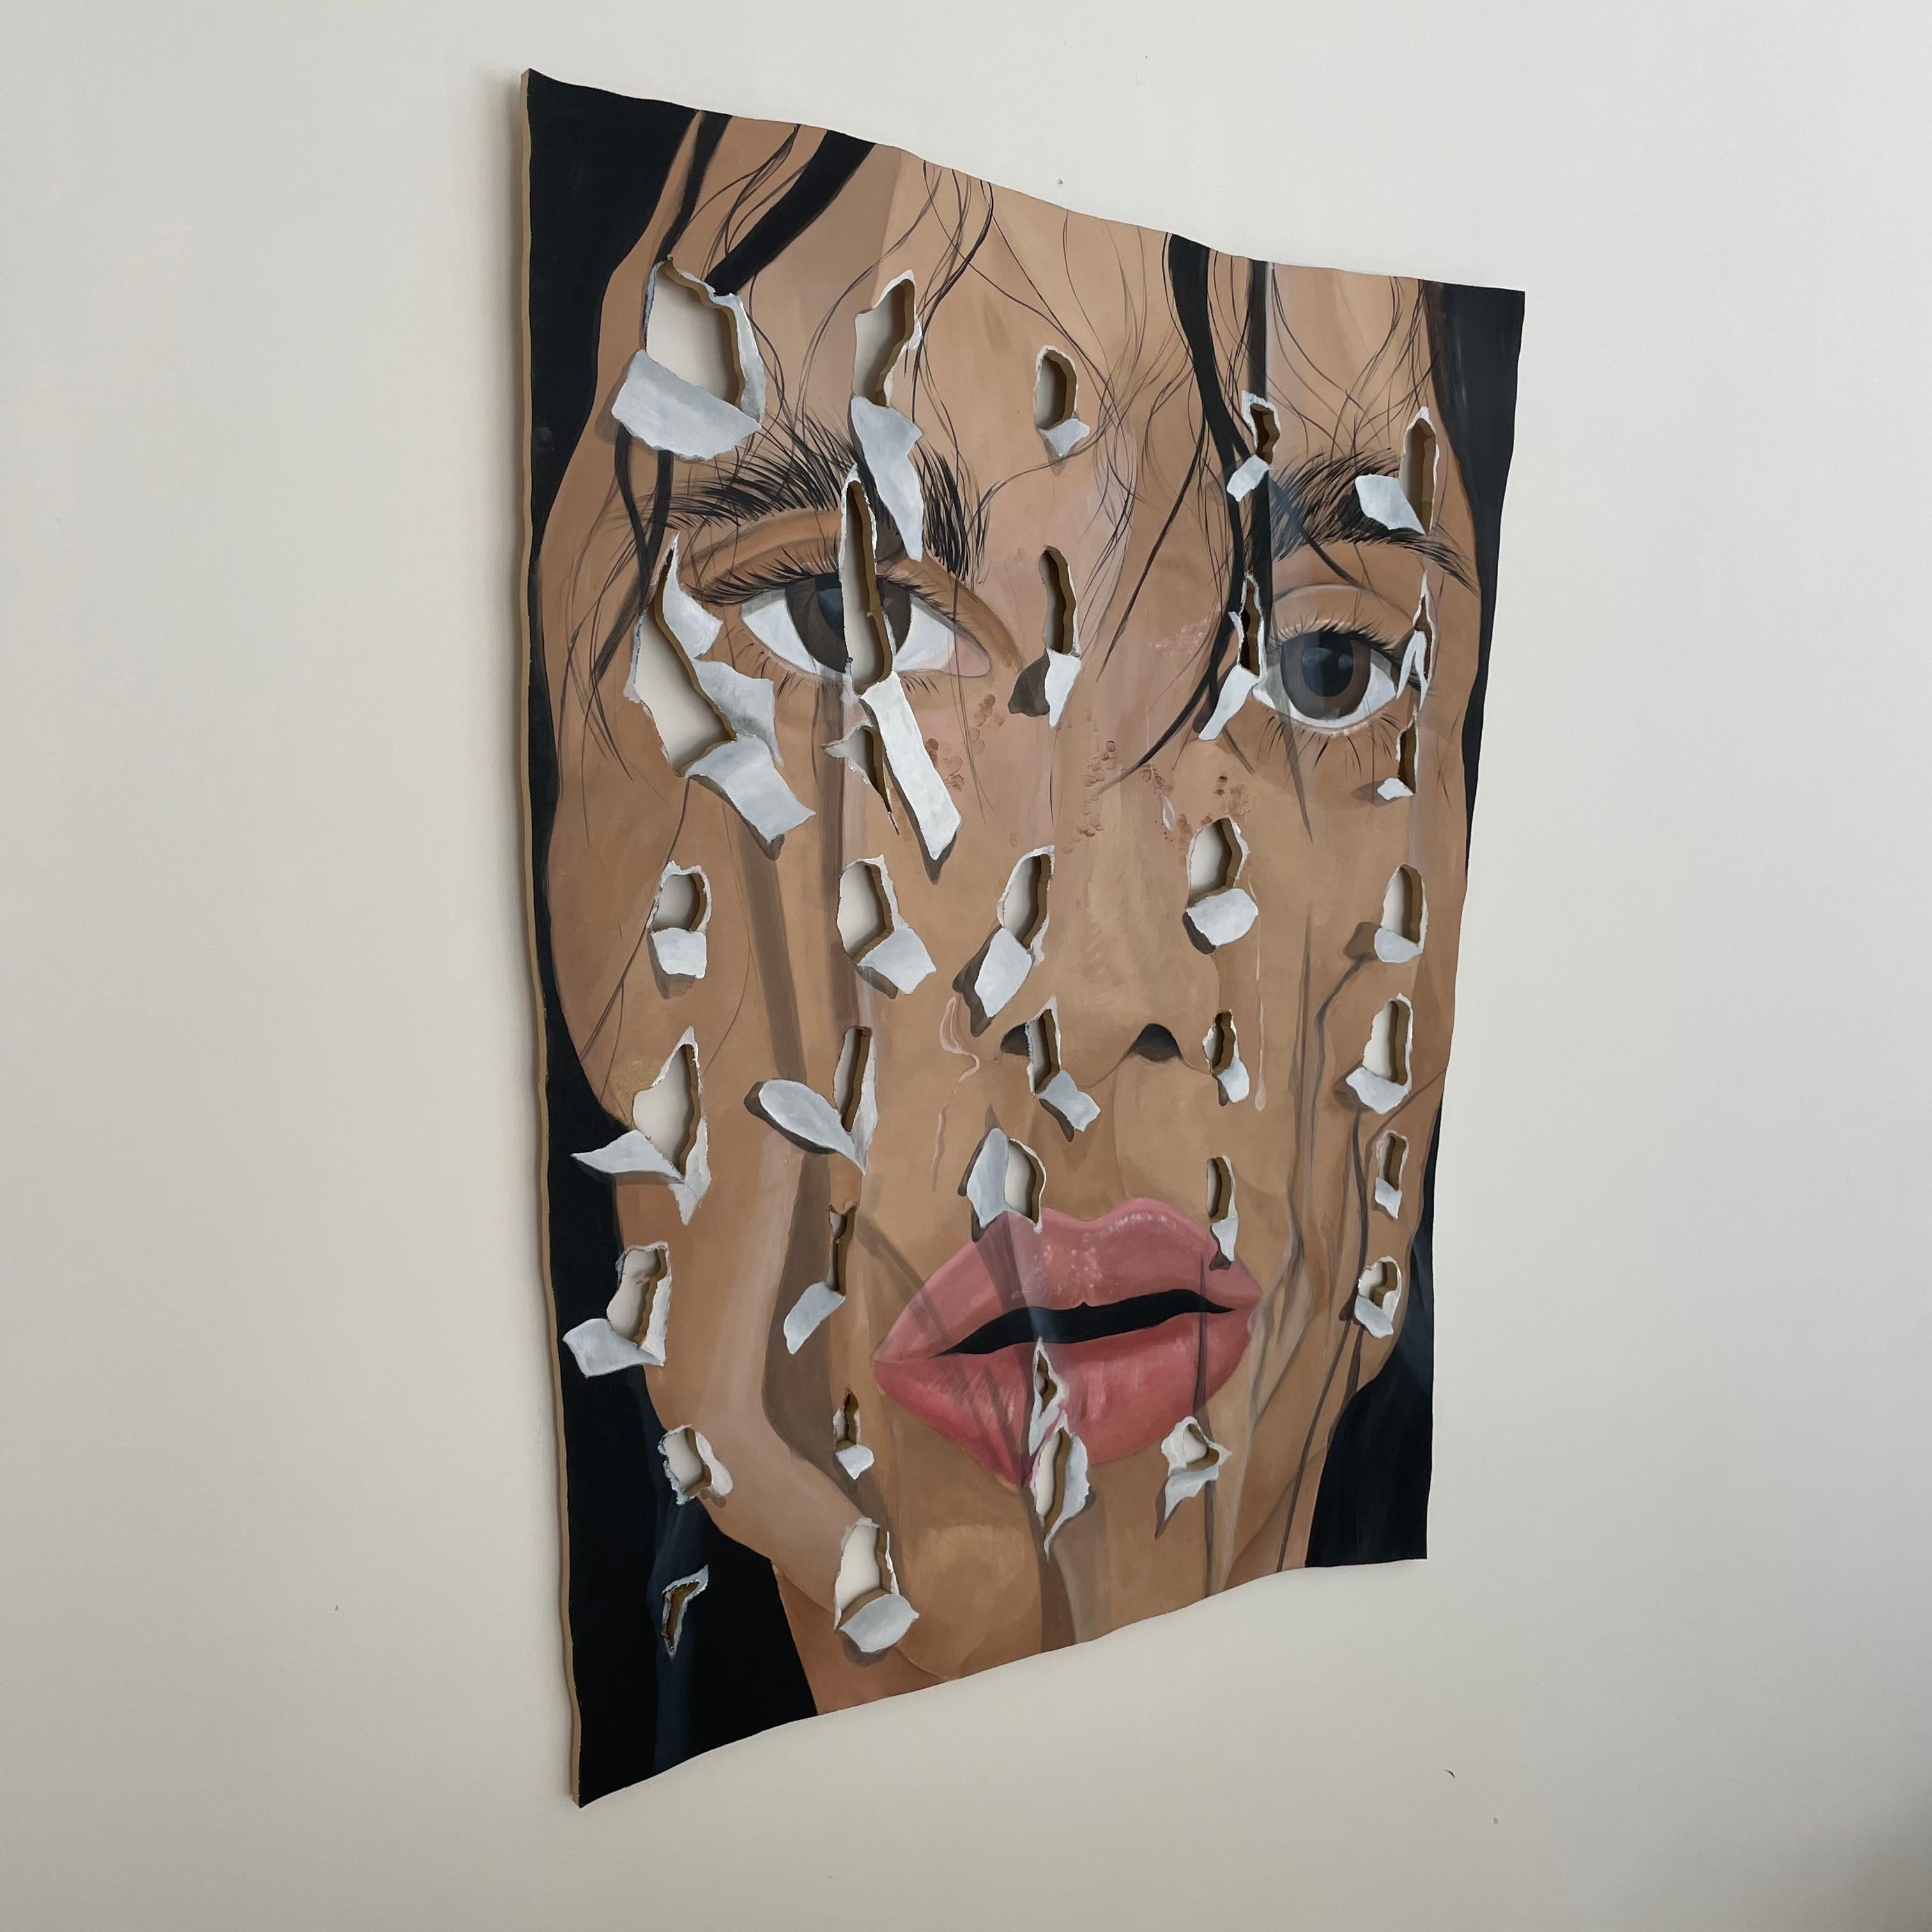 Original painting by German artist Johannes Hemann. Painting on wooden board. Experimental painting with the illusion of cut holes on paper. Stunning portrait of a woman with holes cut out of the wood giving the artwork depth and texture. The